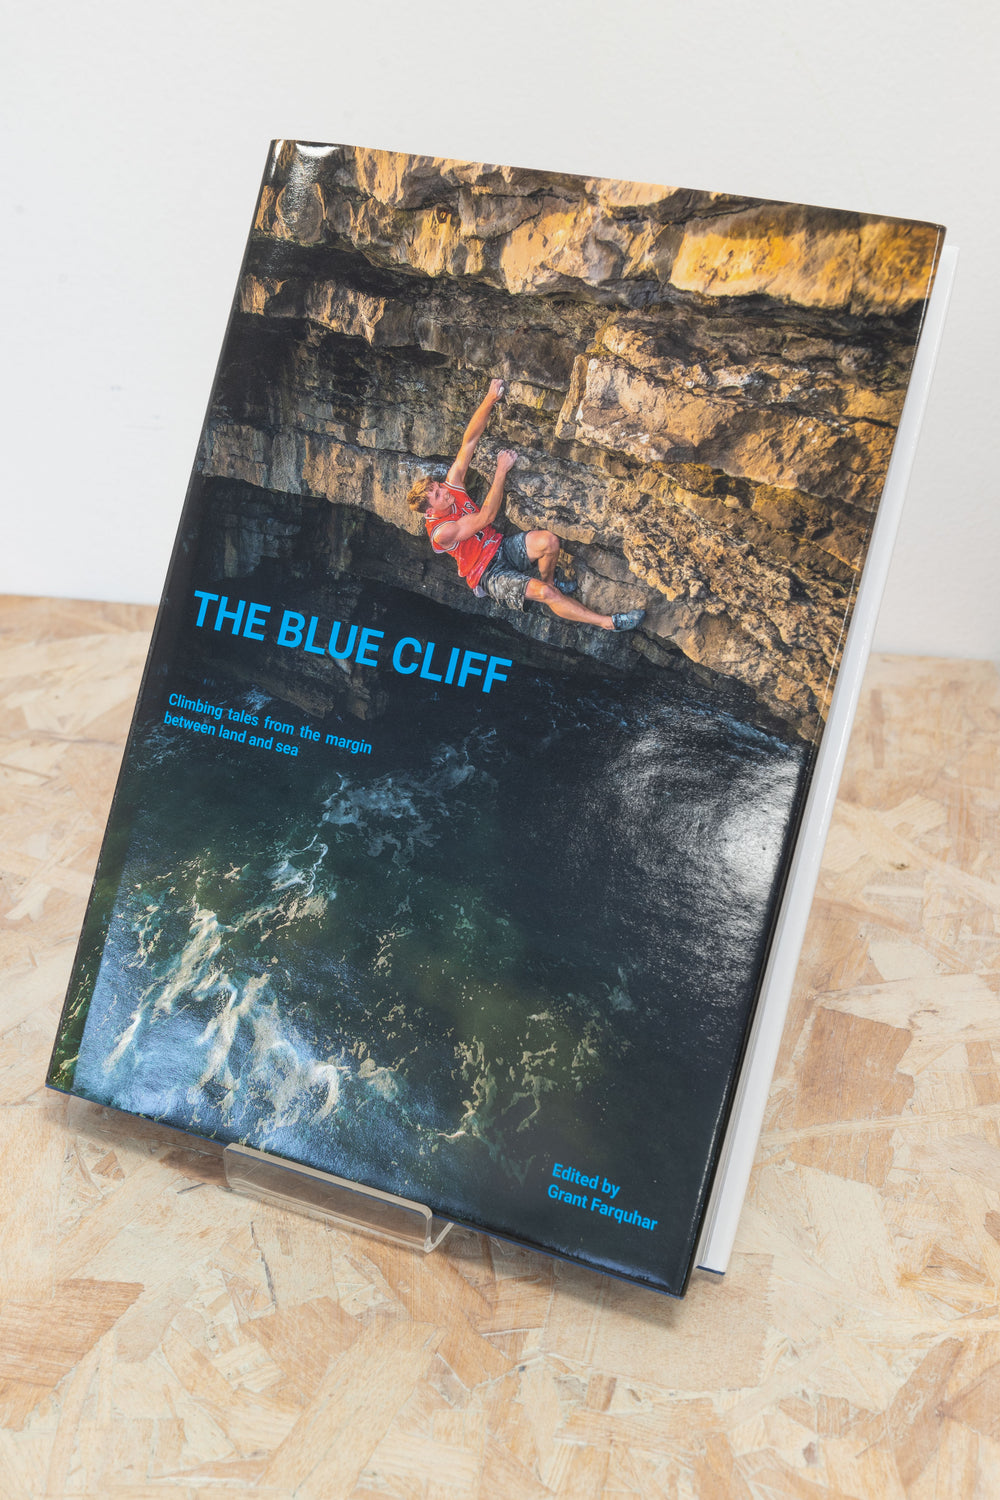 Grant Farquhar - The Blue Cliff: Climbing tales from the margin between land and sea